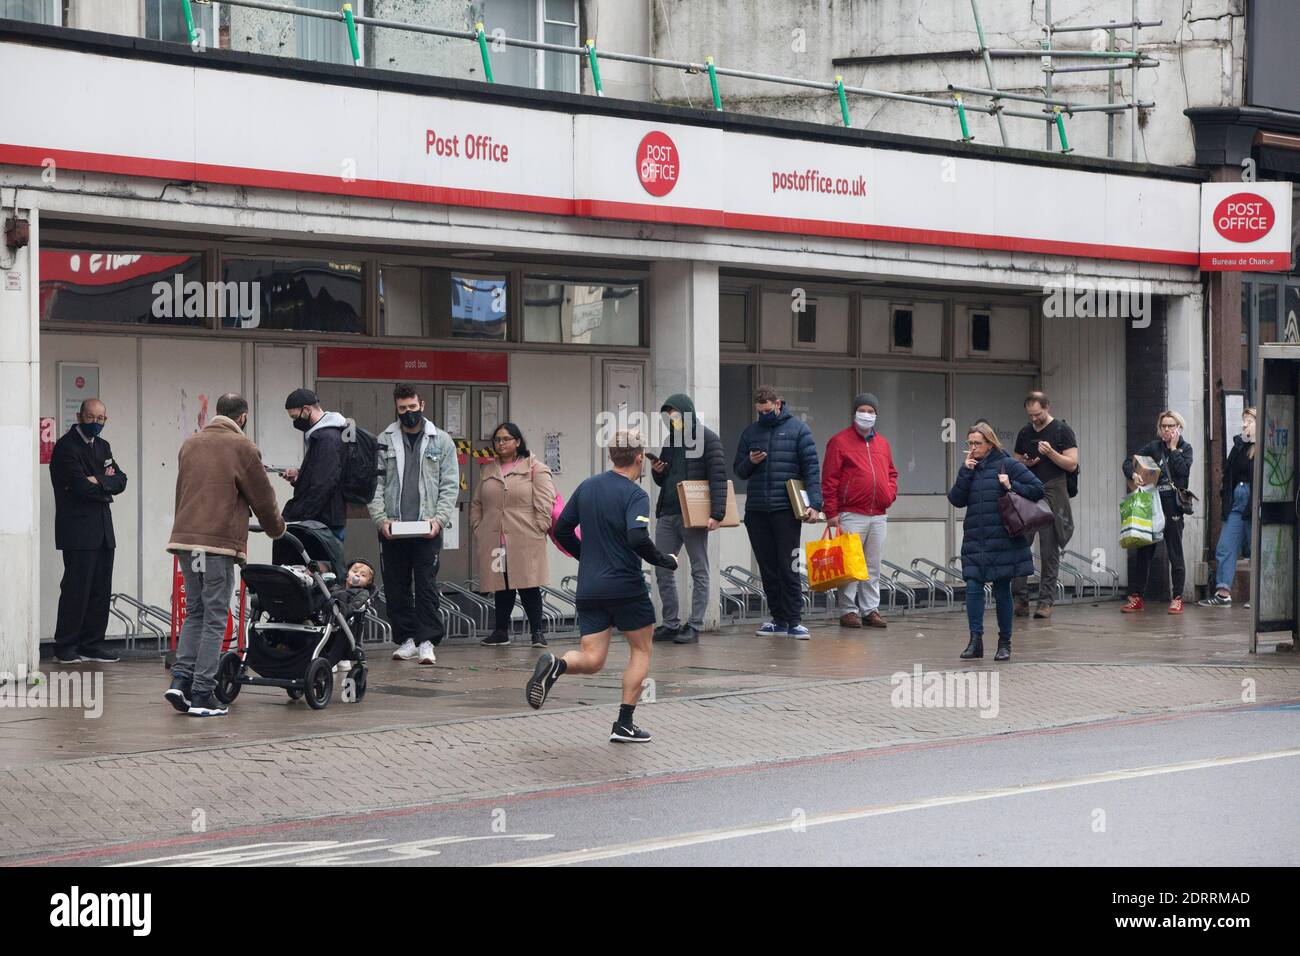 Clapham, London, 21 December 2020: People form a socially distanced queue at the Post Office in Clapham. Many people in Tier 4 are no longer able to visit relatives or form a Christmas social bubble and so will be posting parcels of presents to loved ones. Anna Watson/Alamy Live News Stock Photo